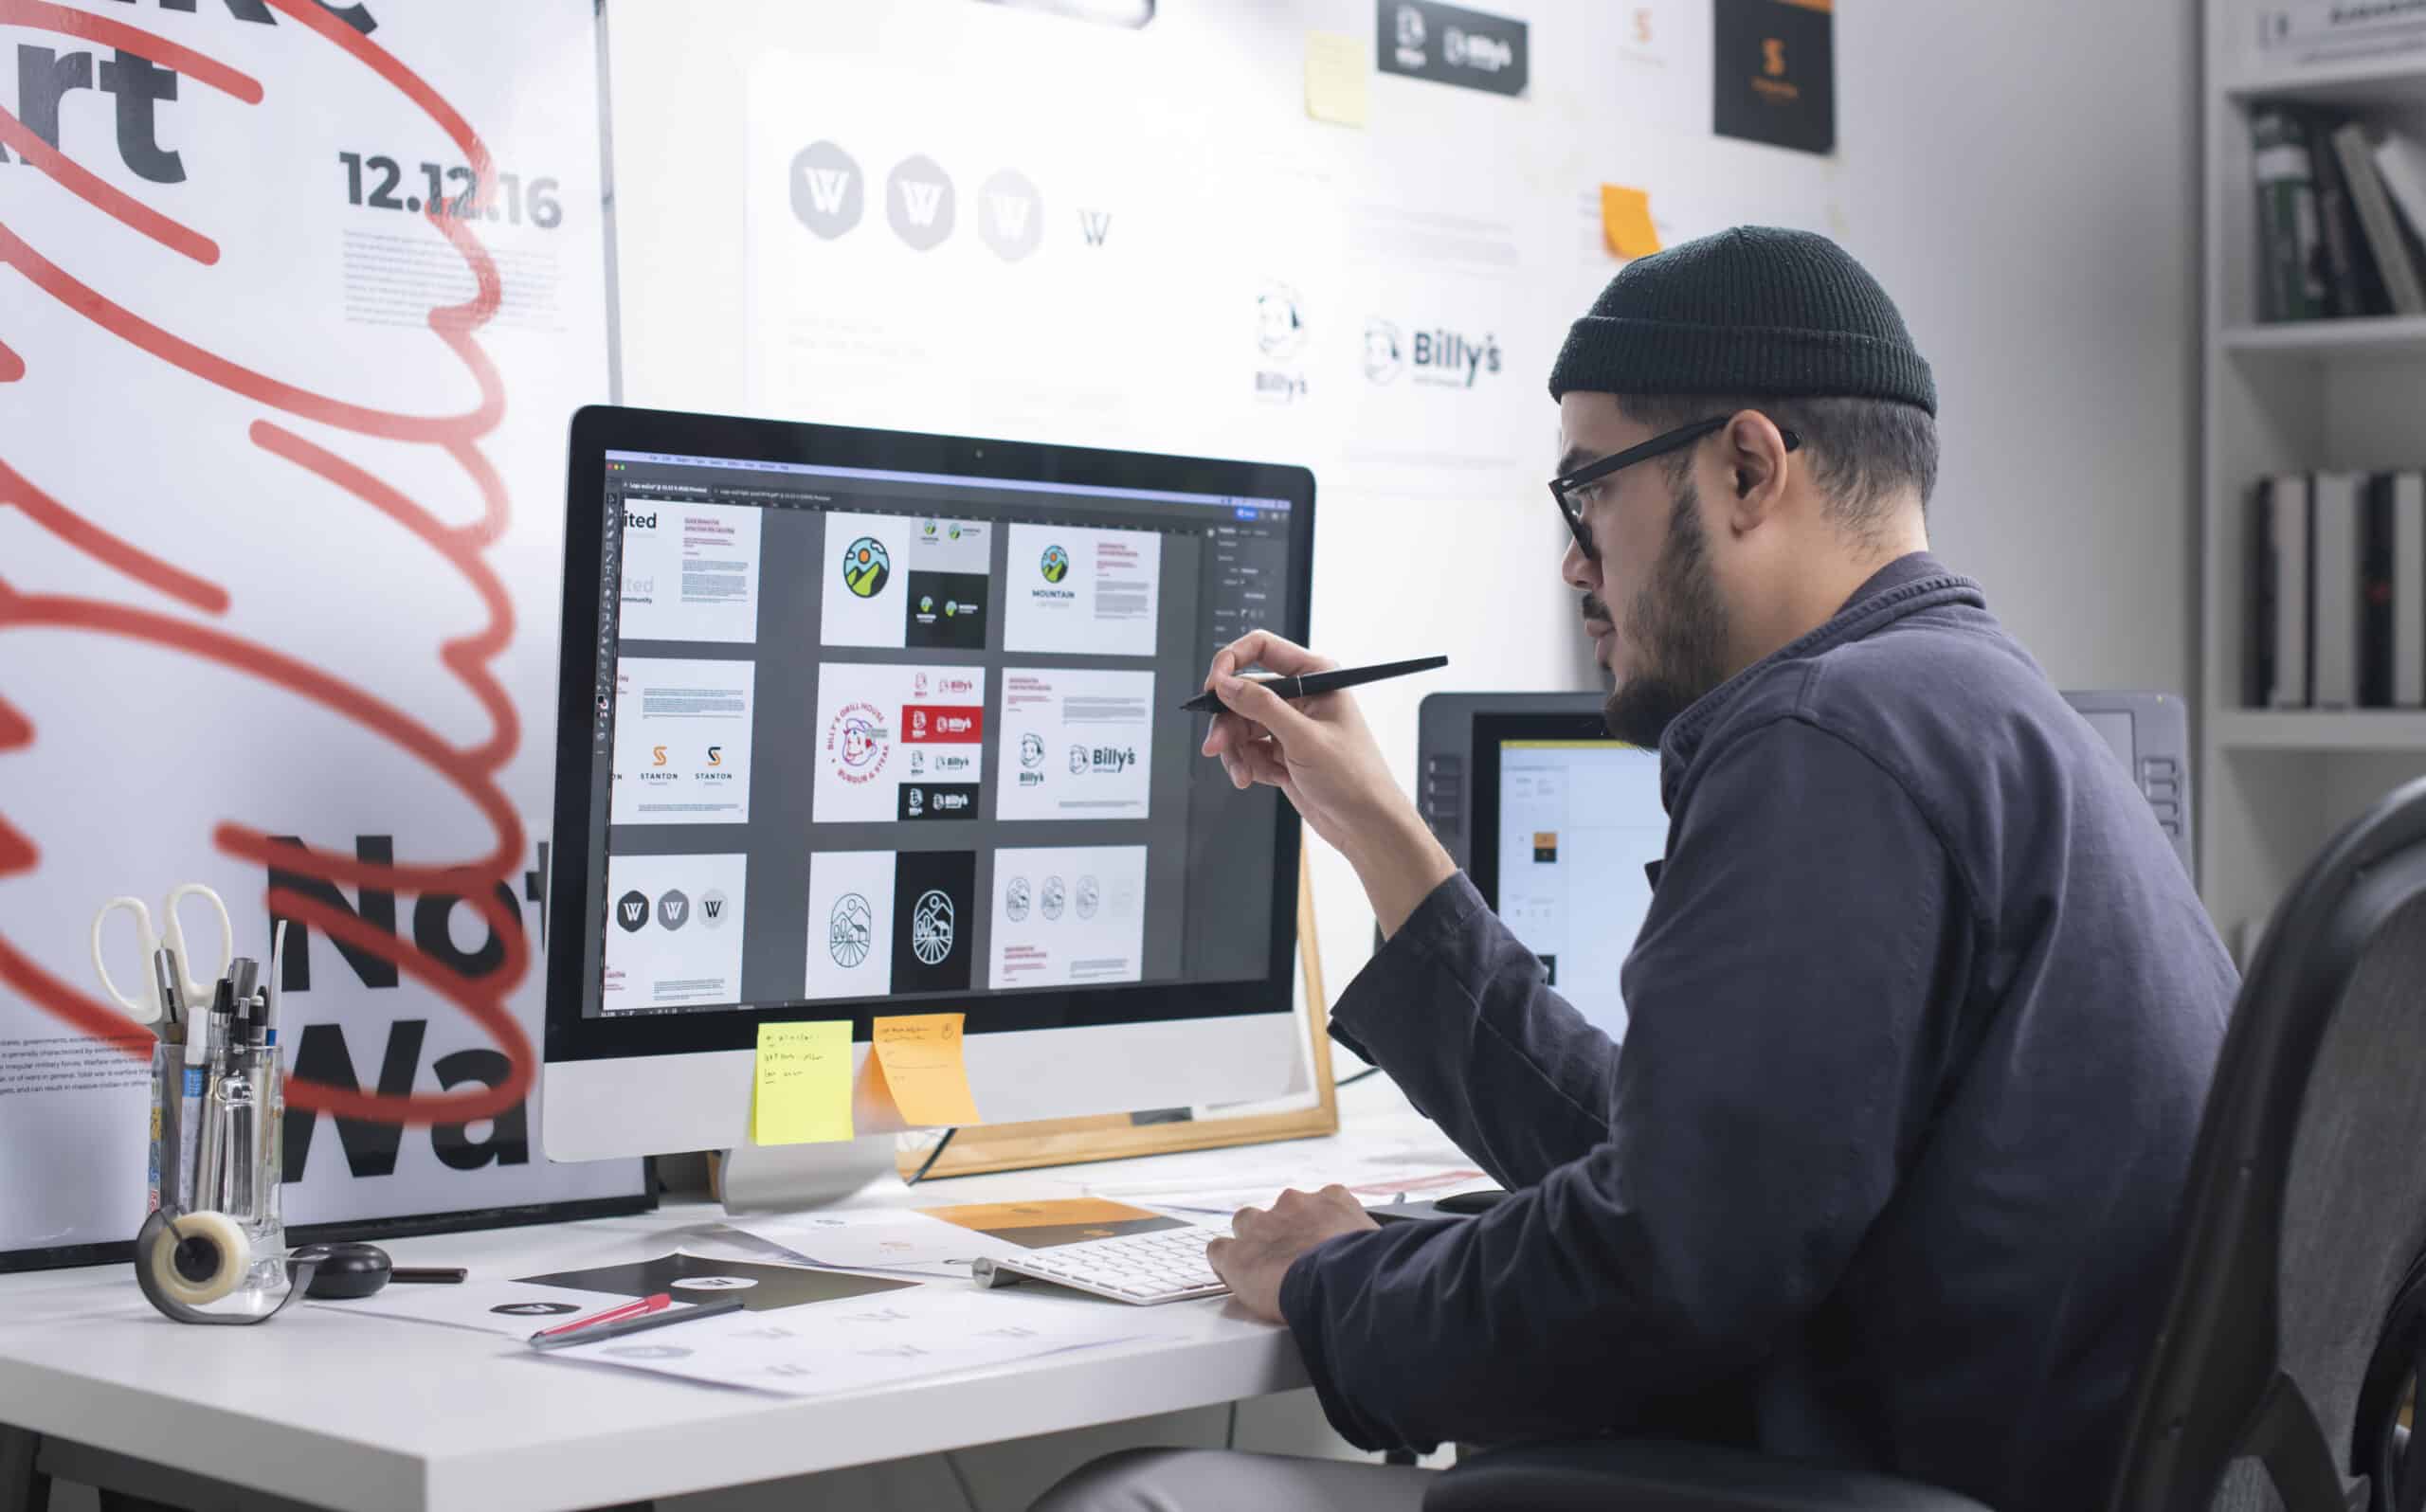 freelancer graphic designer man sitting at computer with grey shirt and beanie.